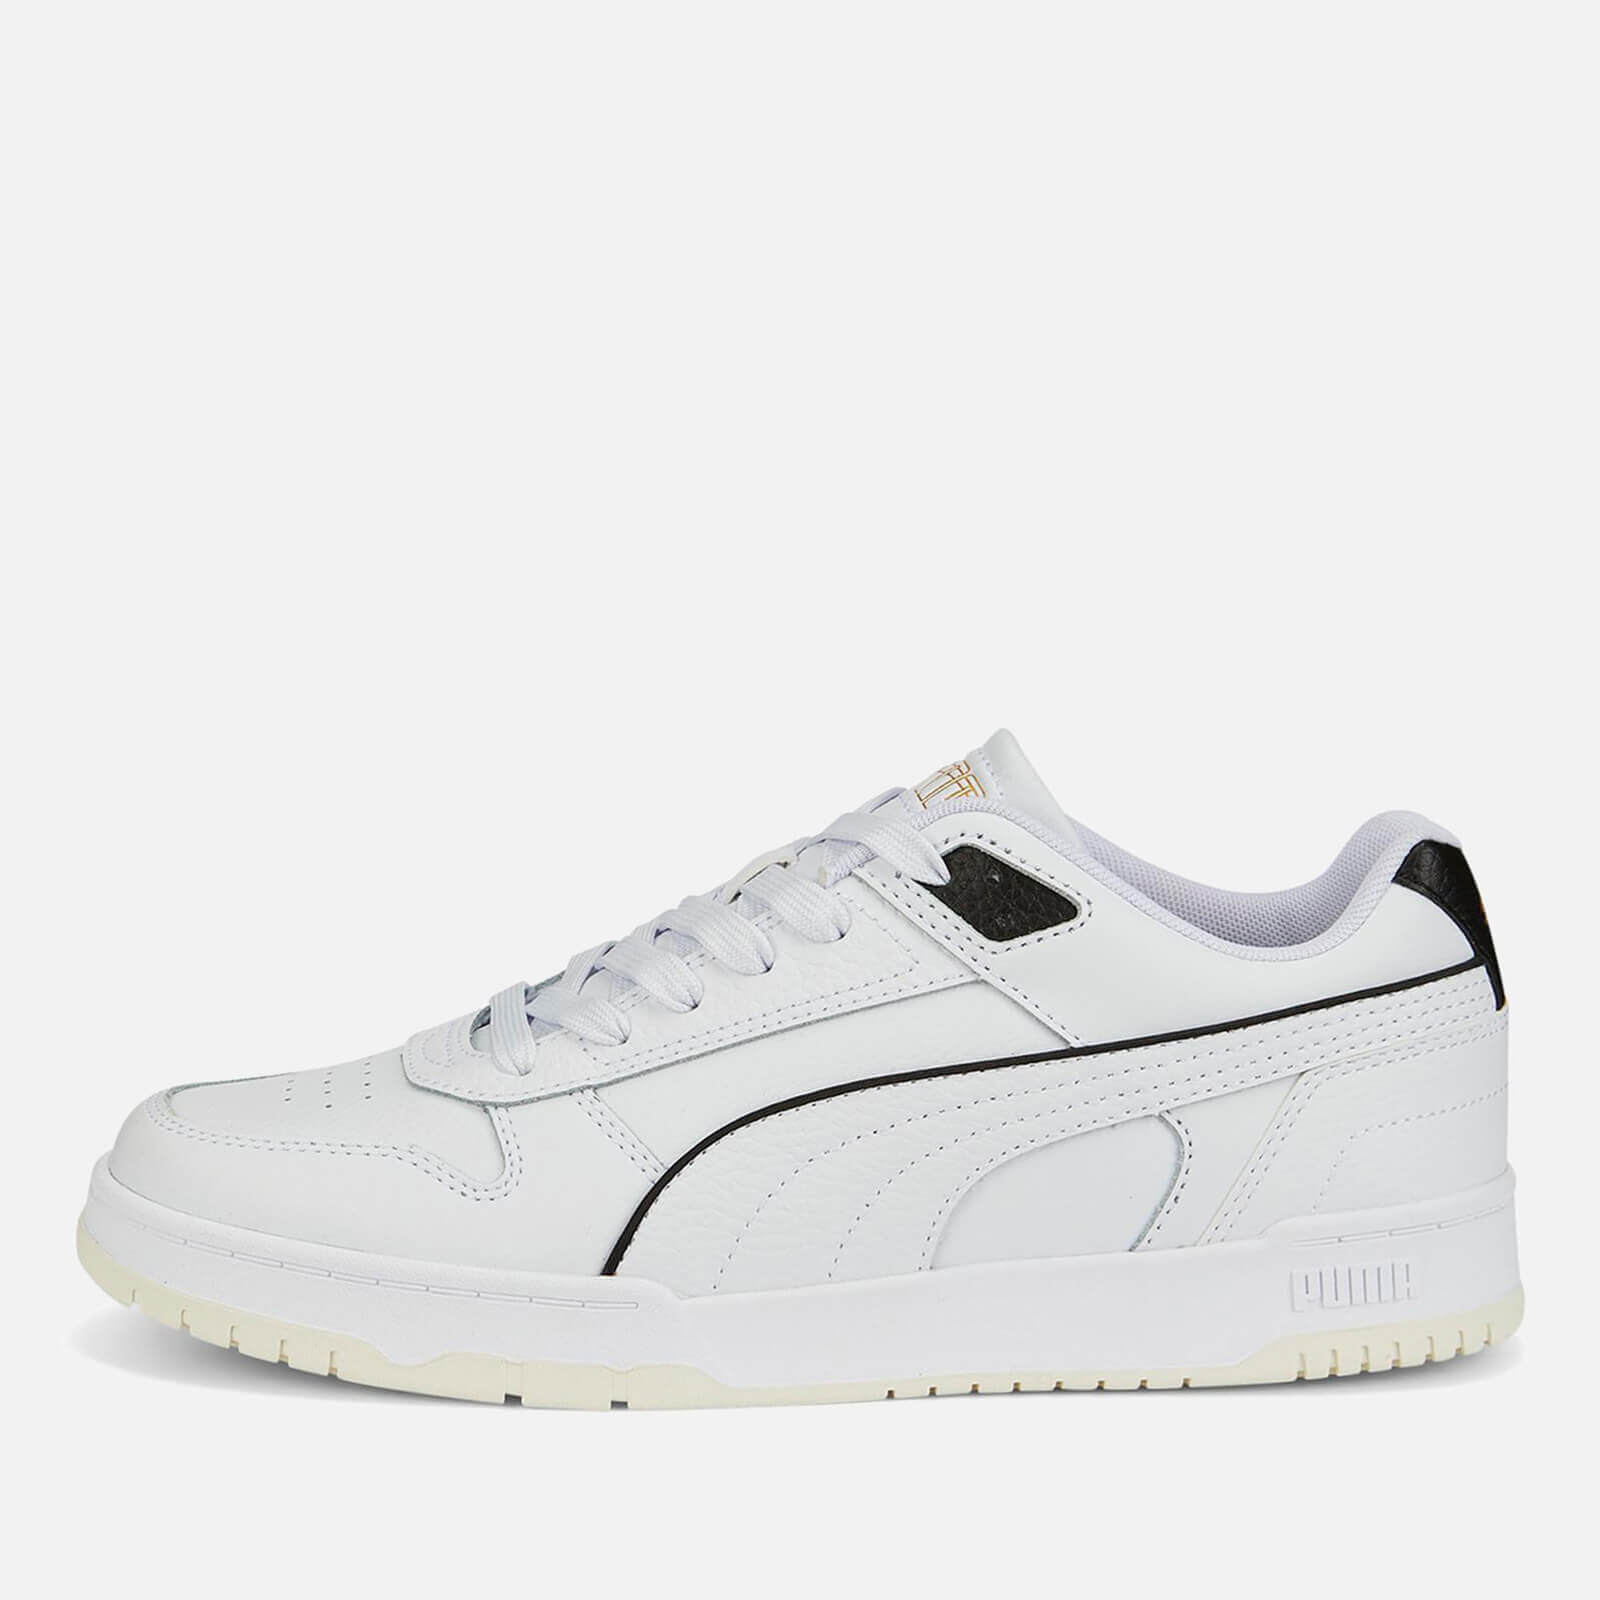 Puma Men’s RBD Game Leather Trainers